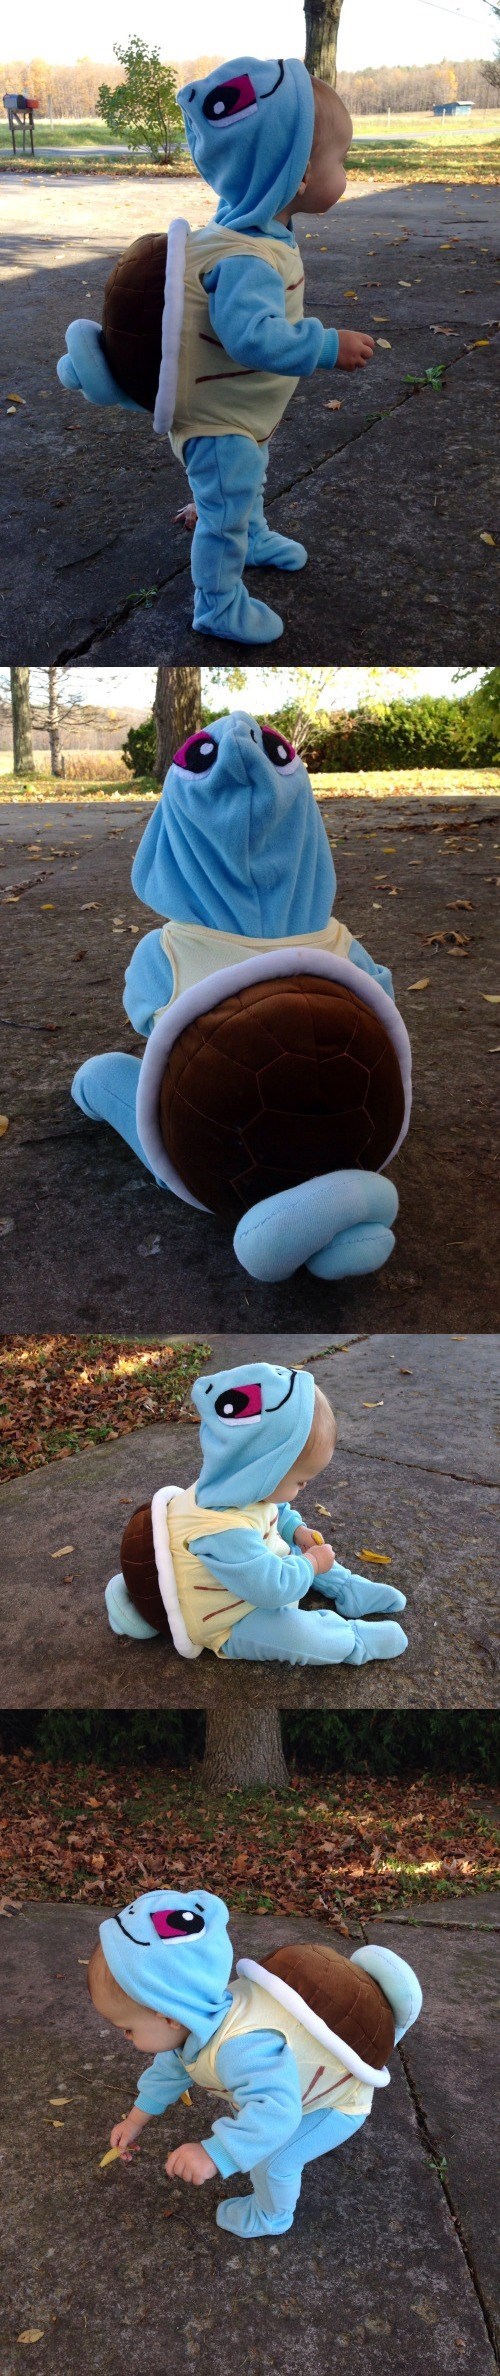 It Doesn't Get Cuter Than This Baby Squirtle